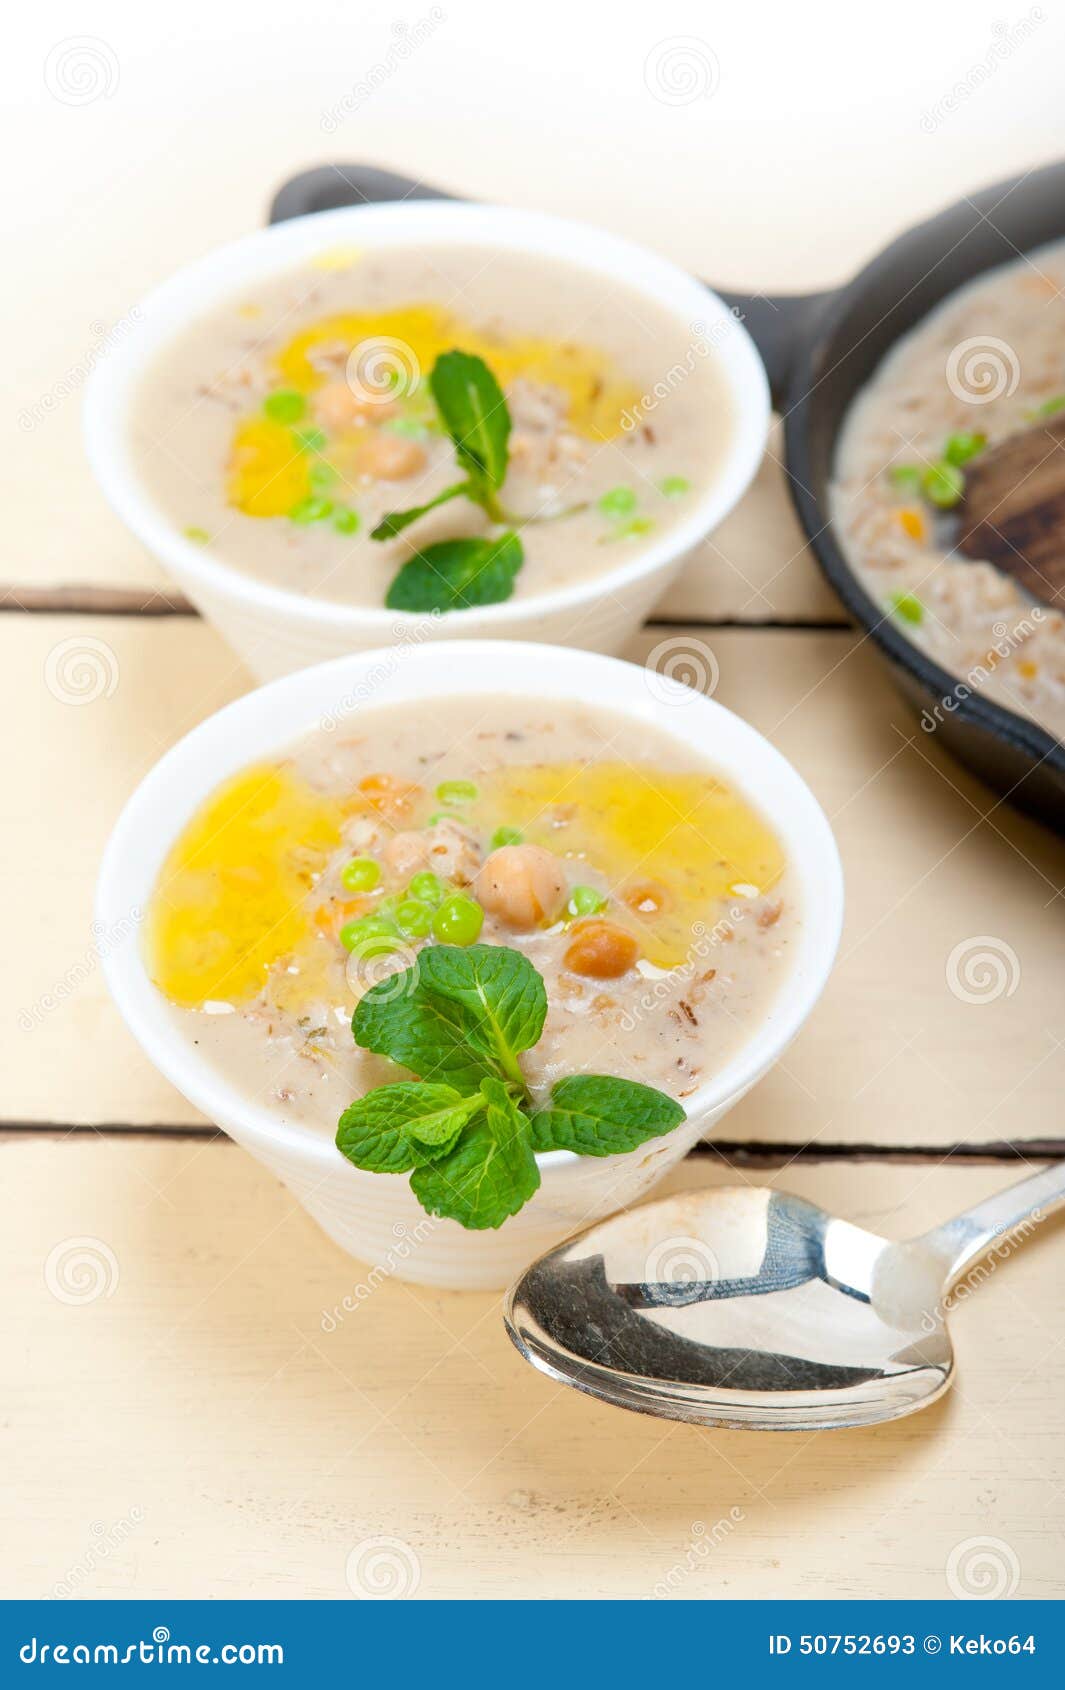 Hearty Middle Eastern Chickpea and Barley Soup Stock Image - Image of ...